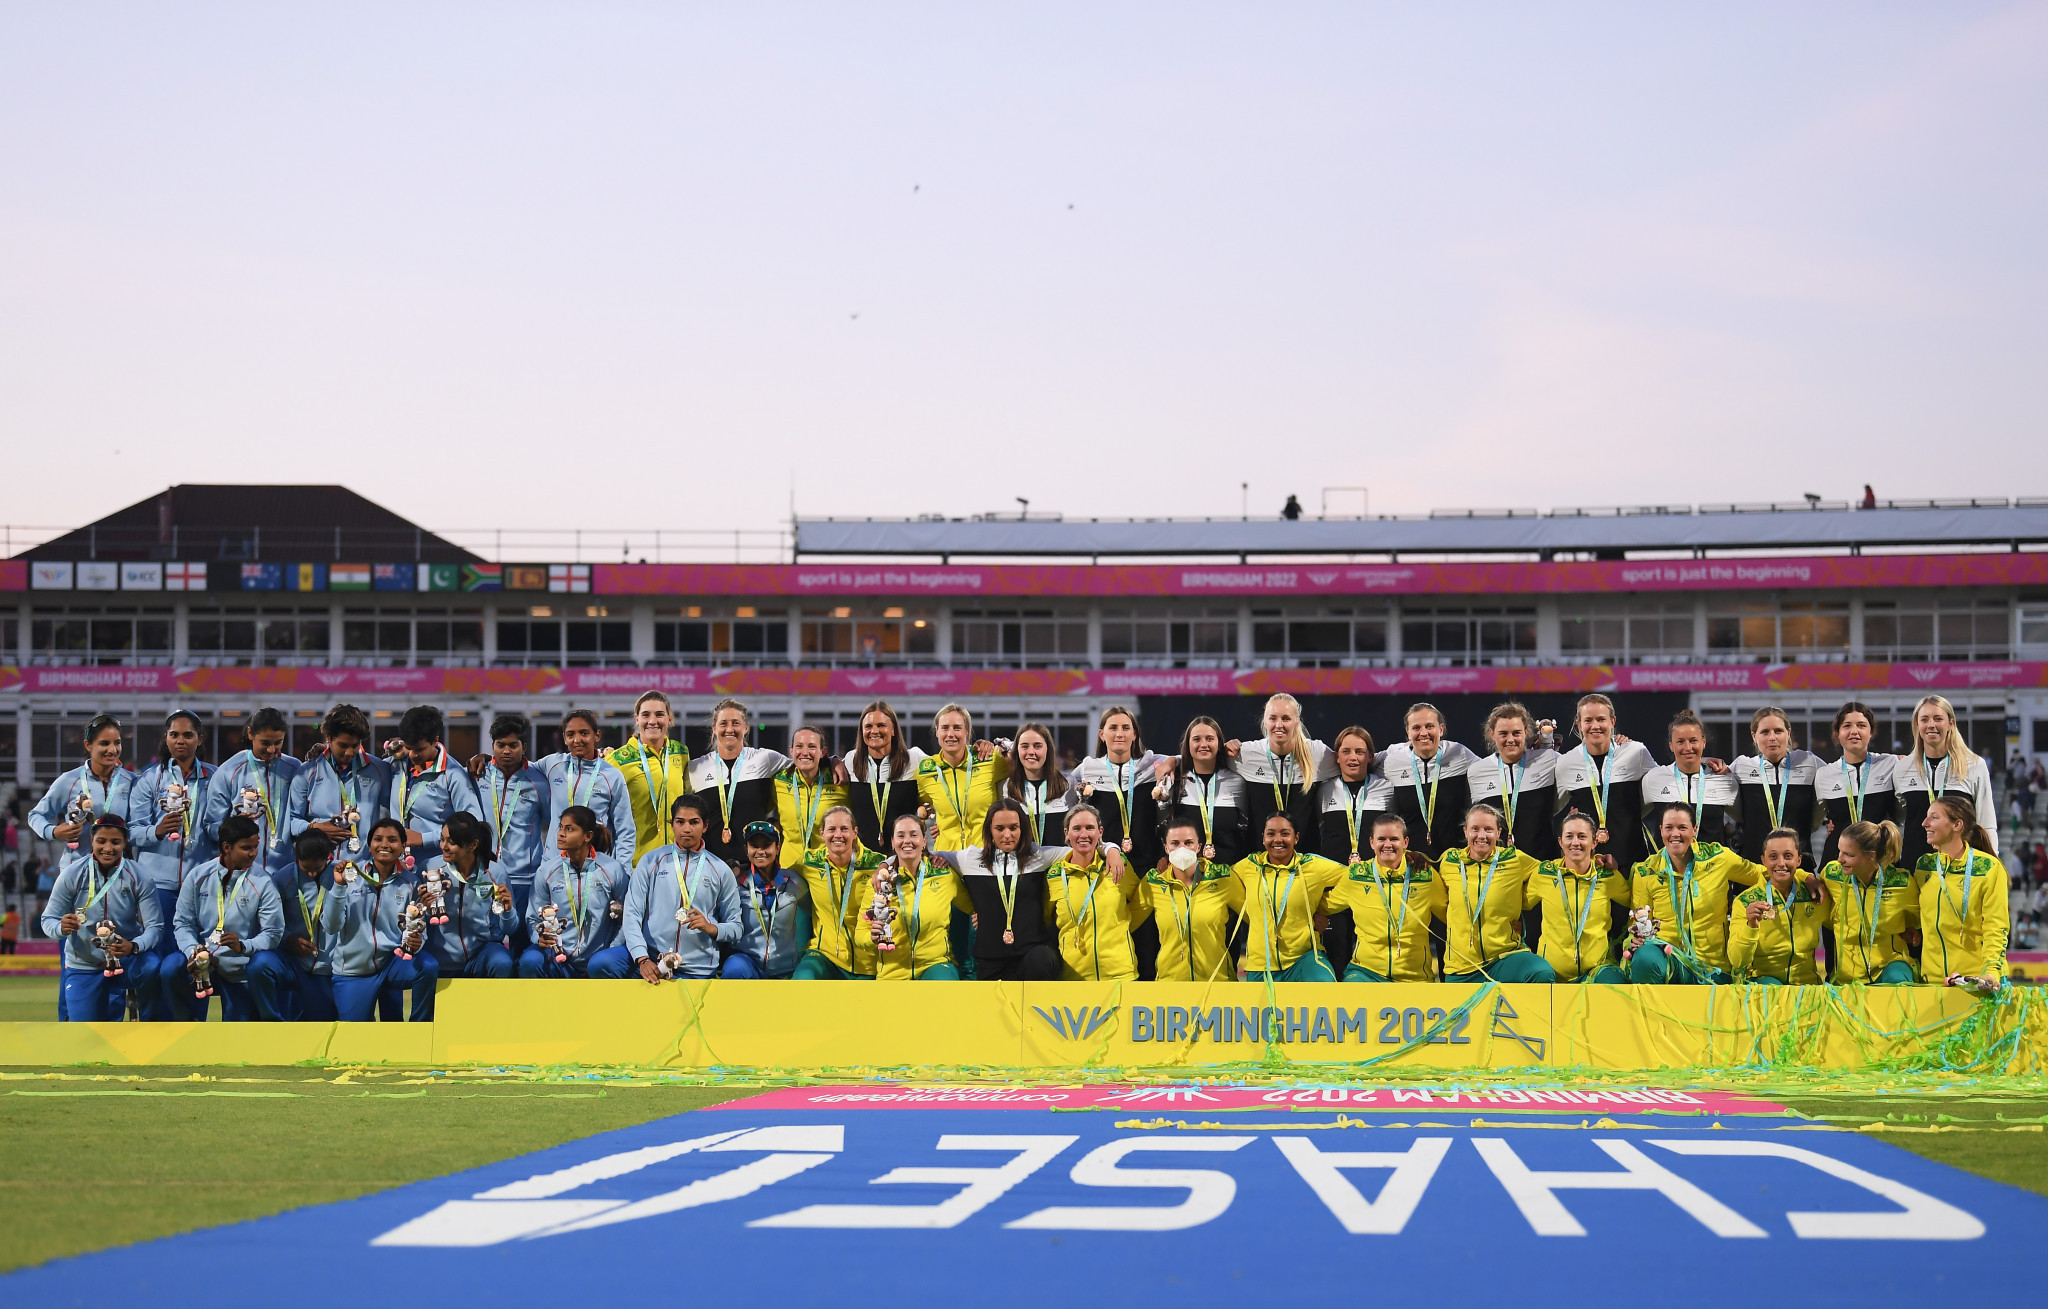 Women's cricket featured at the Birmingham 2022 Commonwealth Games last year, with Australia claiming the gold medals ©Getty Images